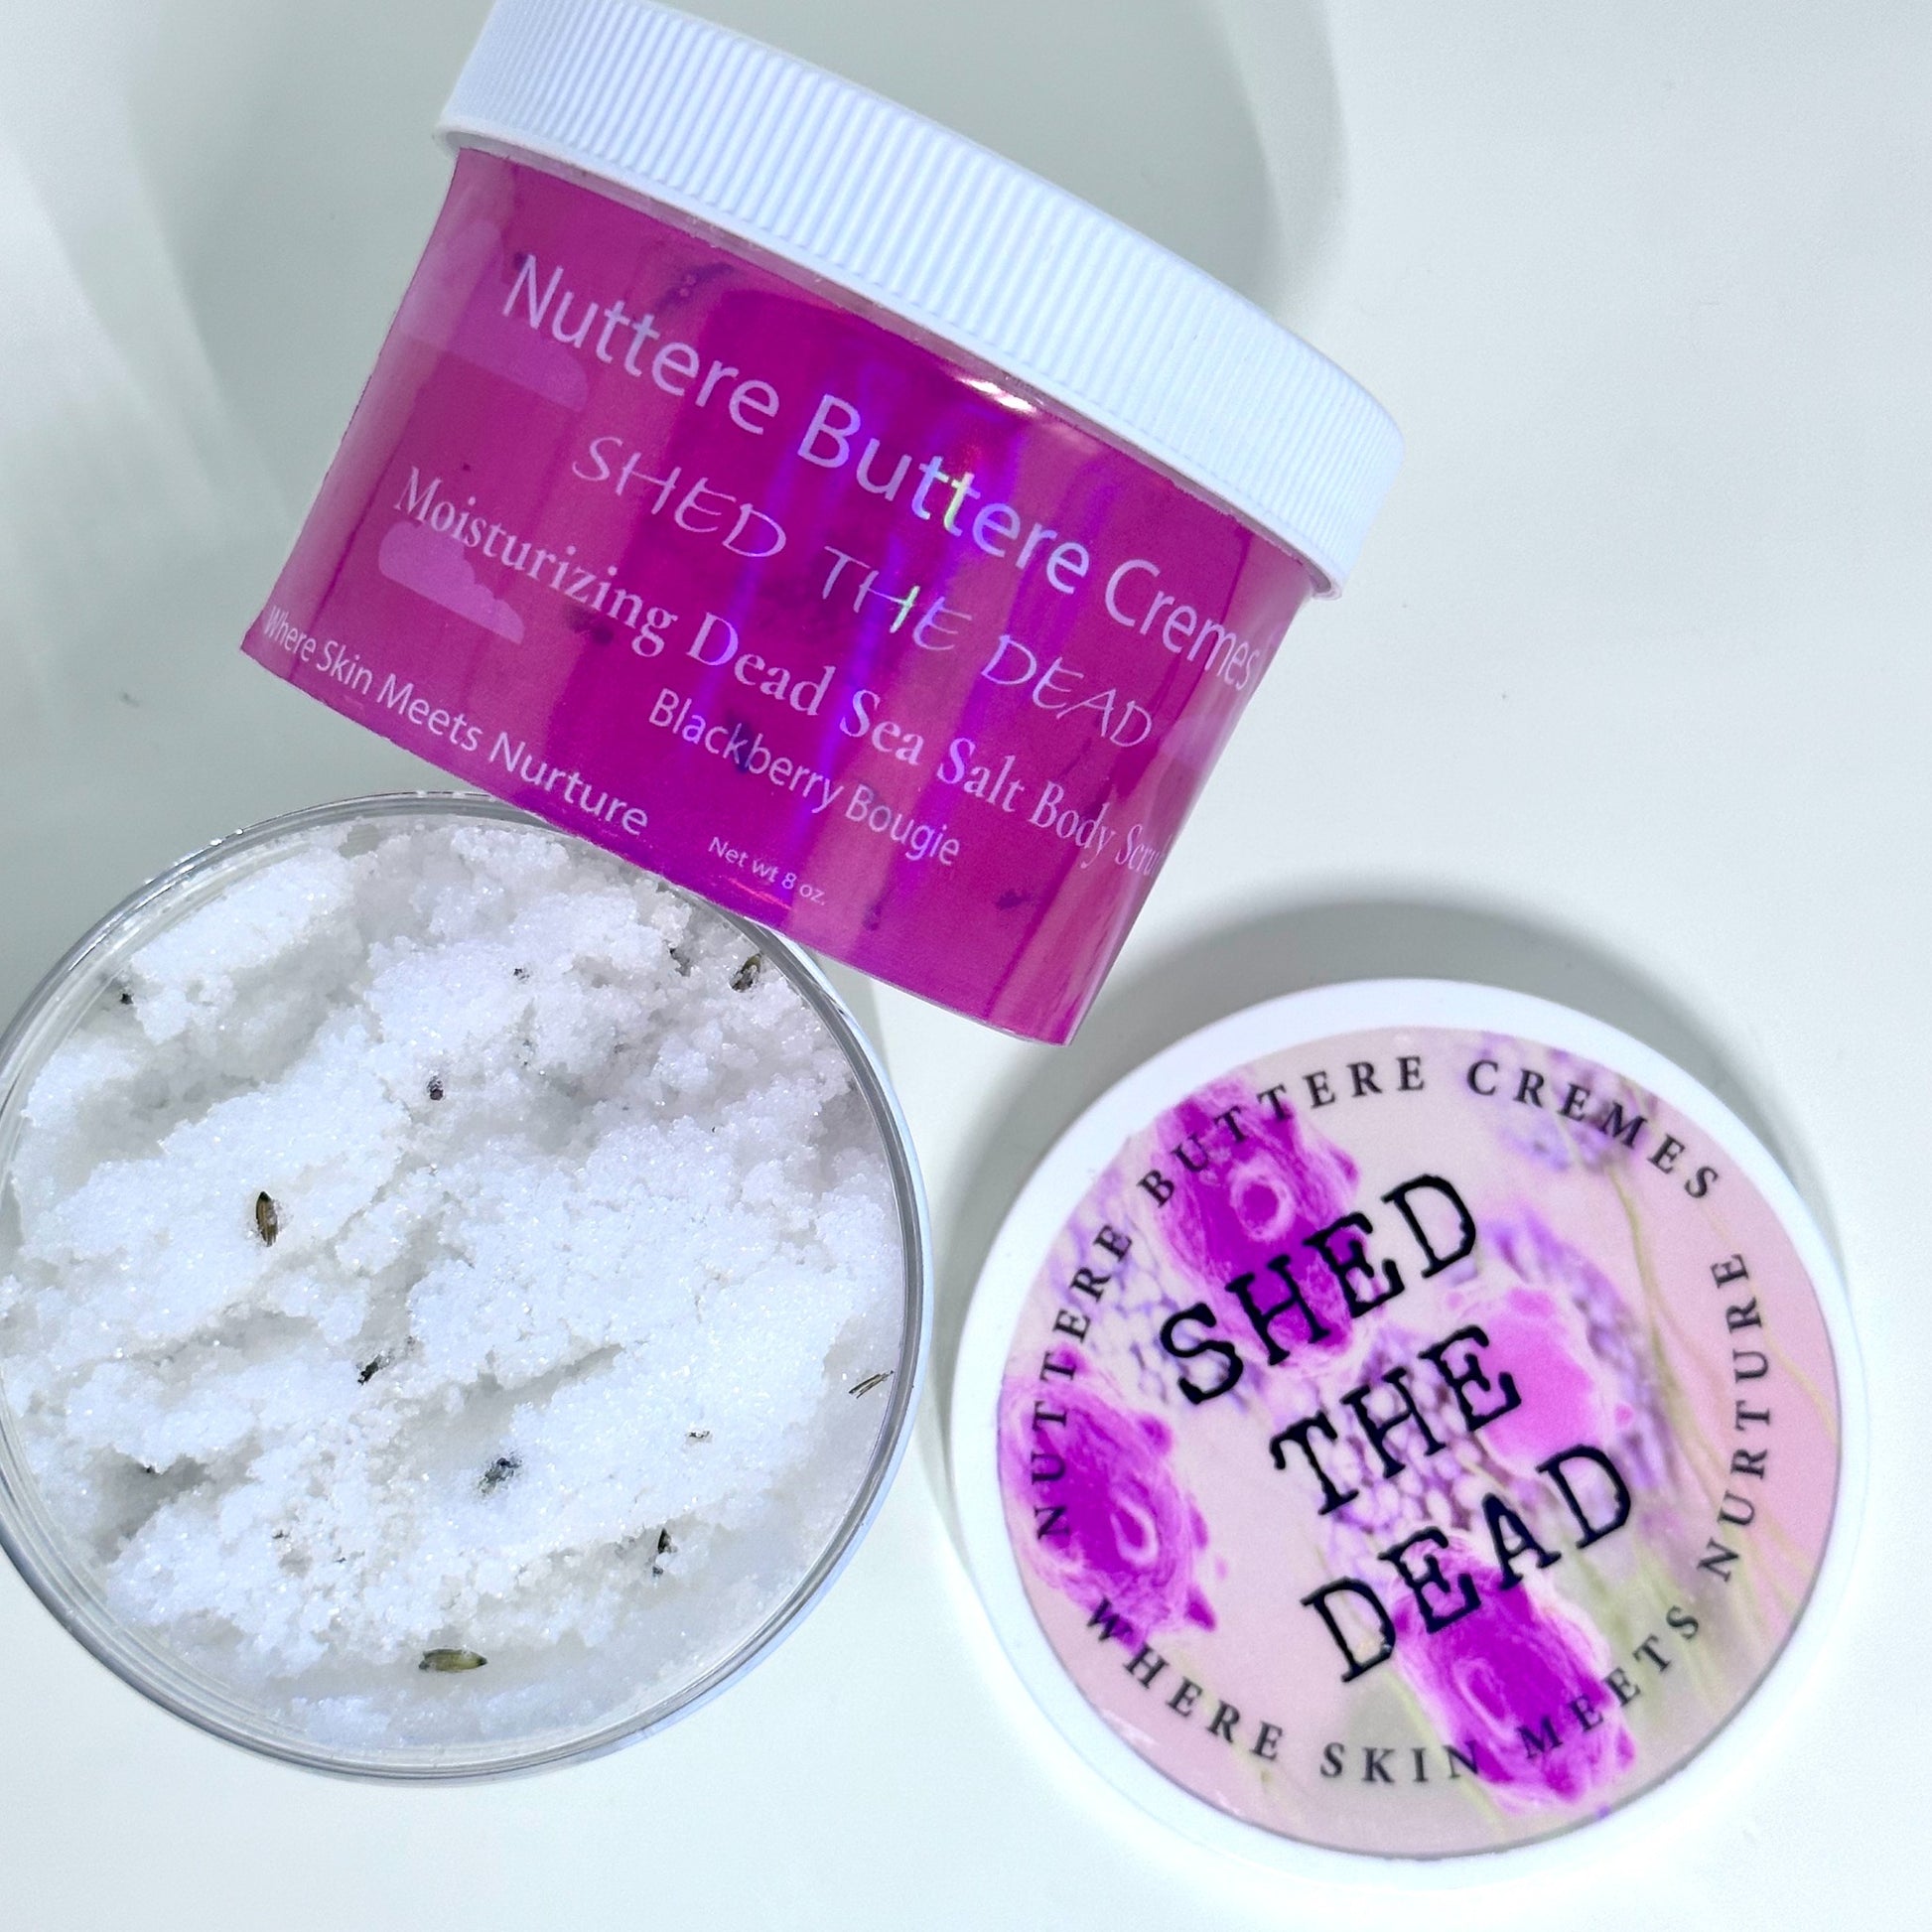 Image of Shed the Dead Body Scrub in Dead Sea Salt with natural ingredients and exfoliating properties.